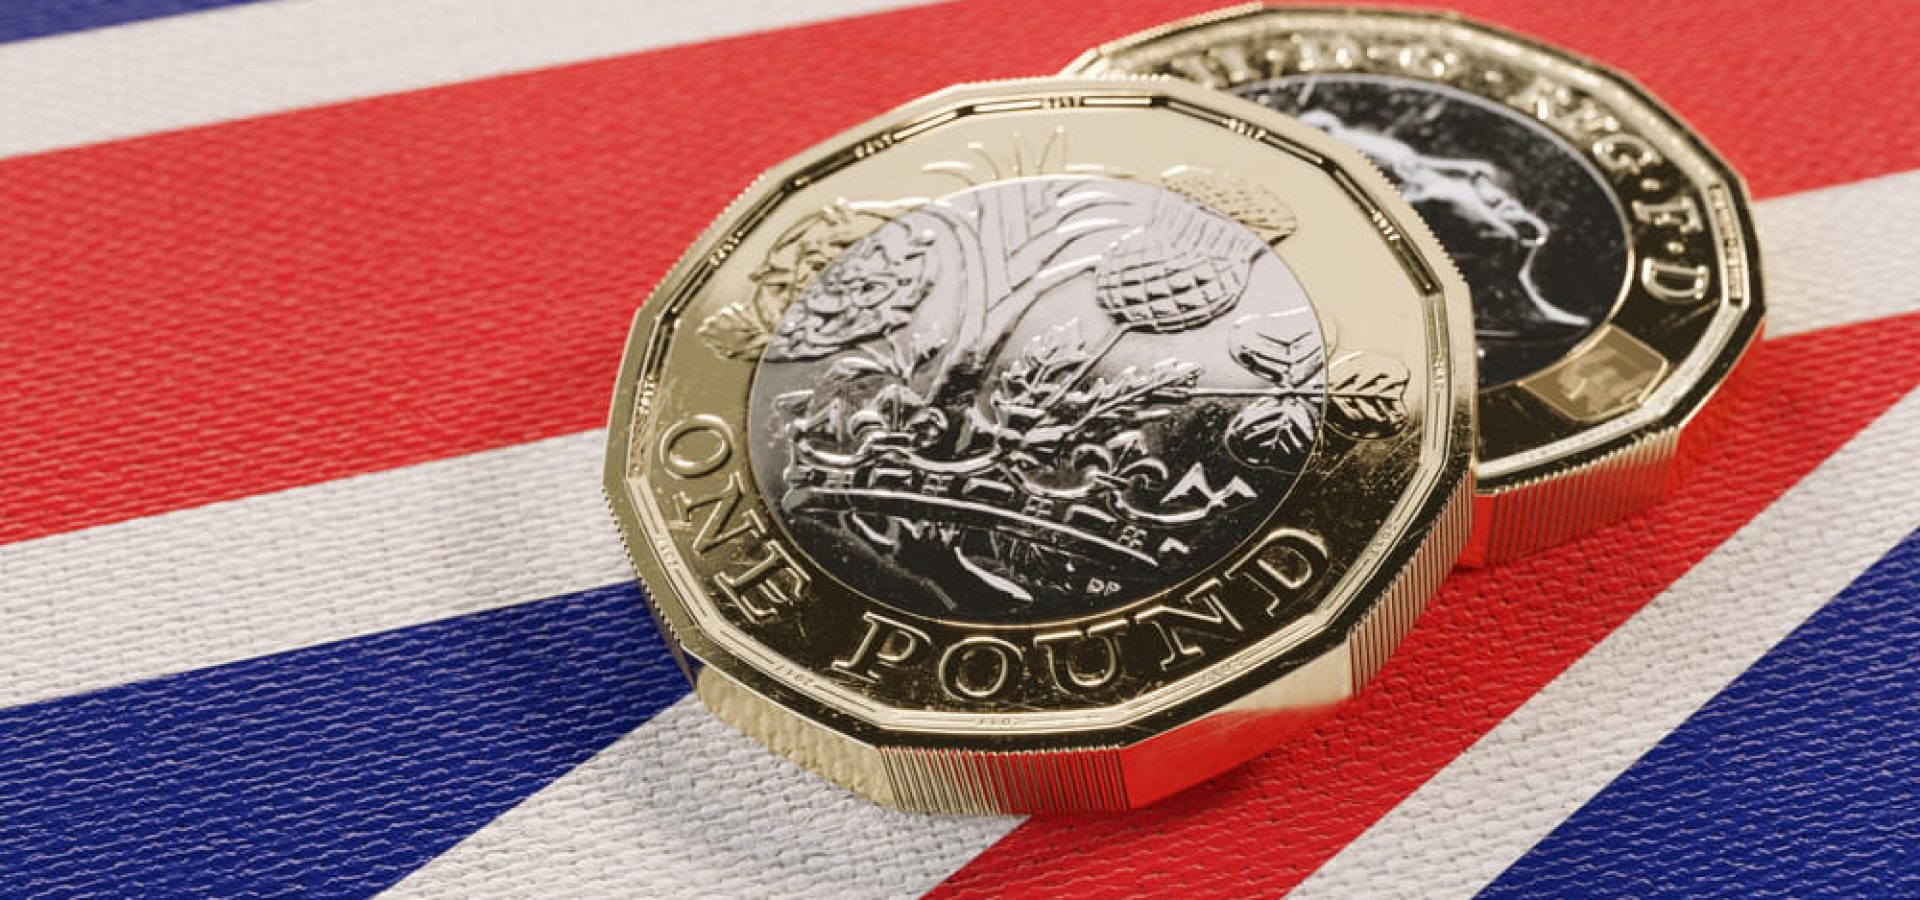 Wibest – Sterling: Pound Sterling coins on top of the UK flag.